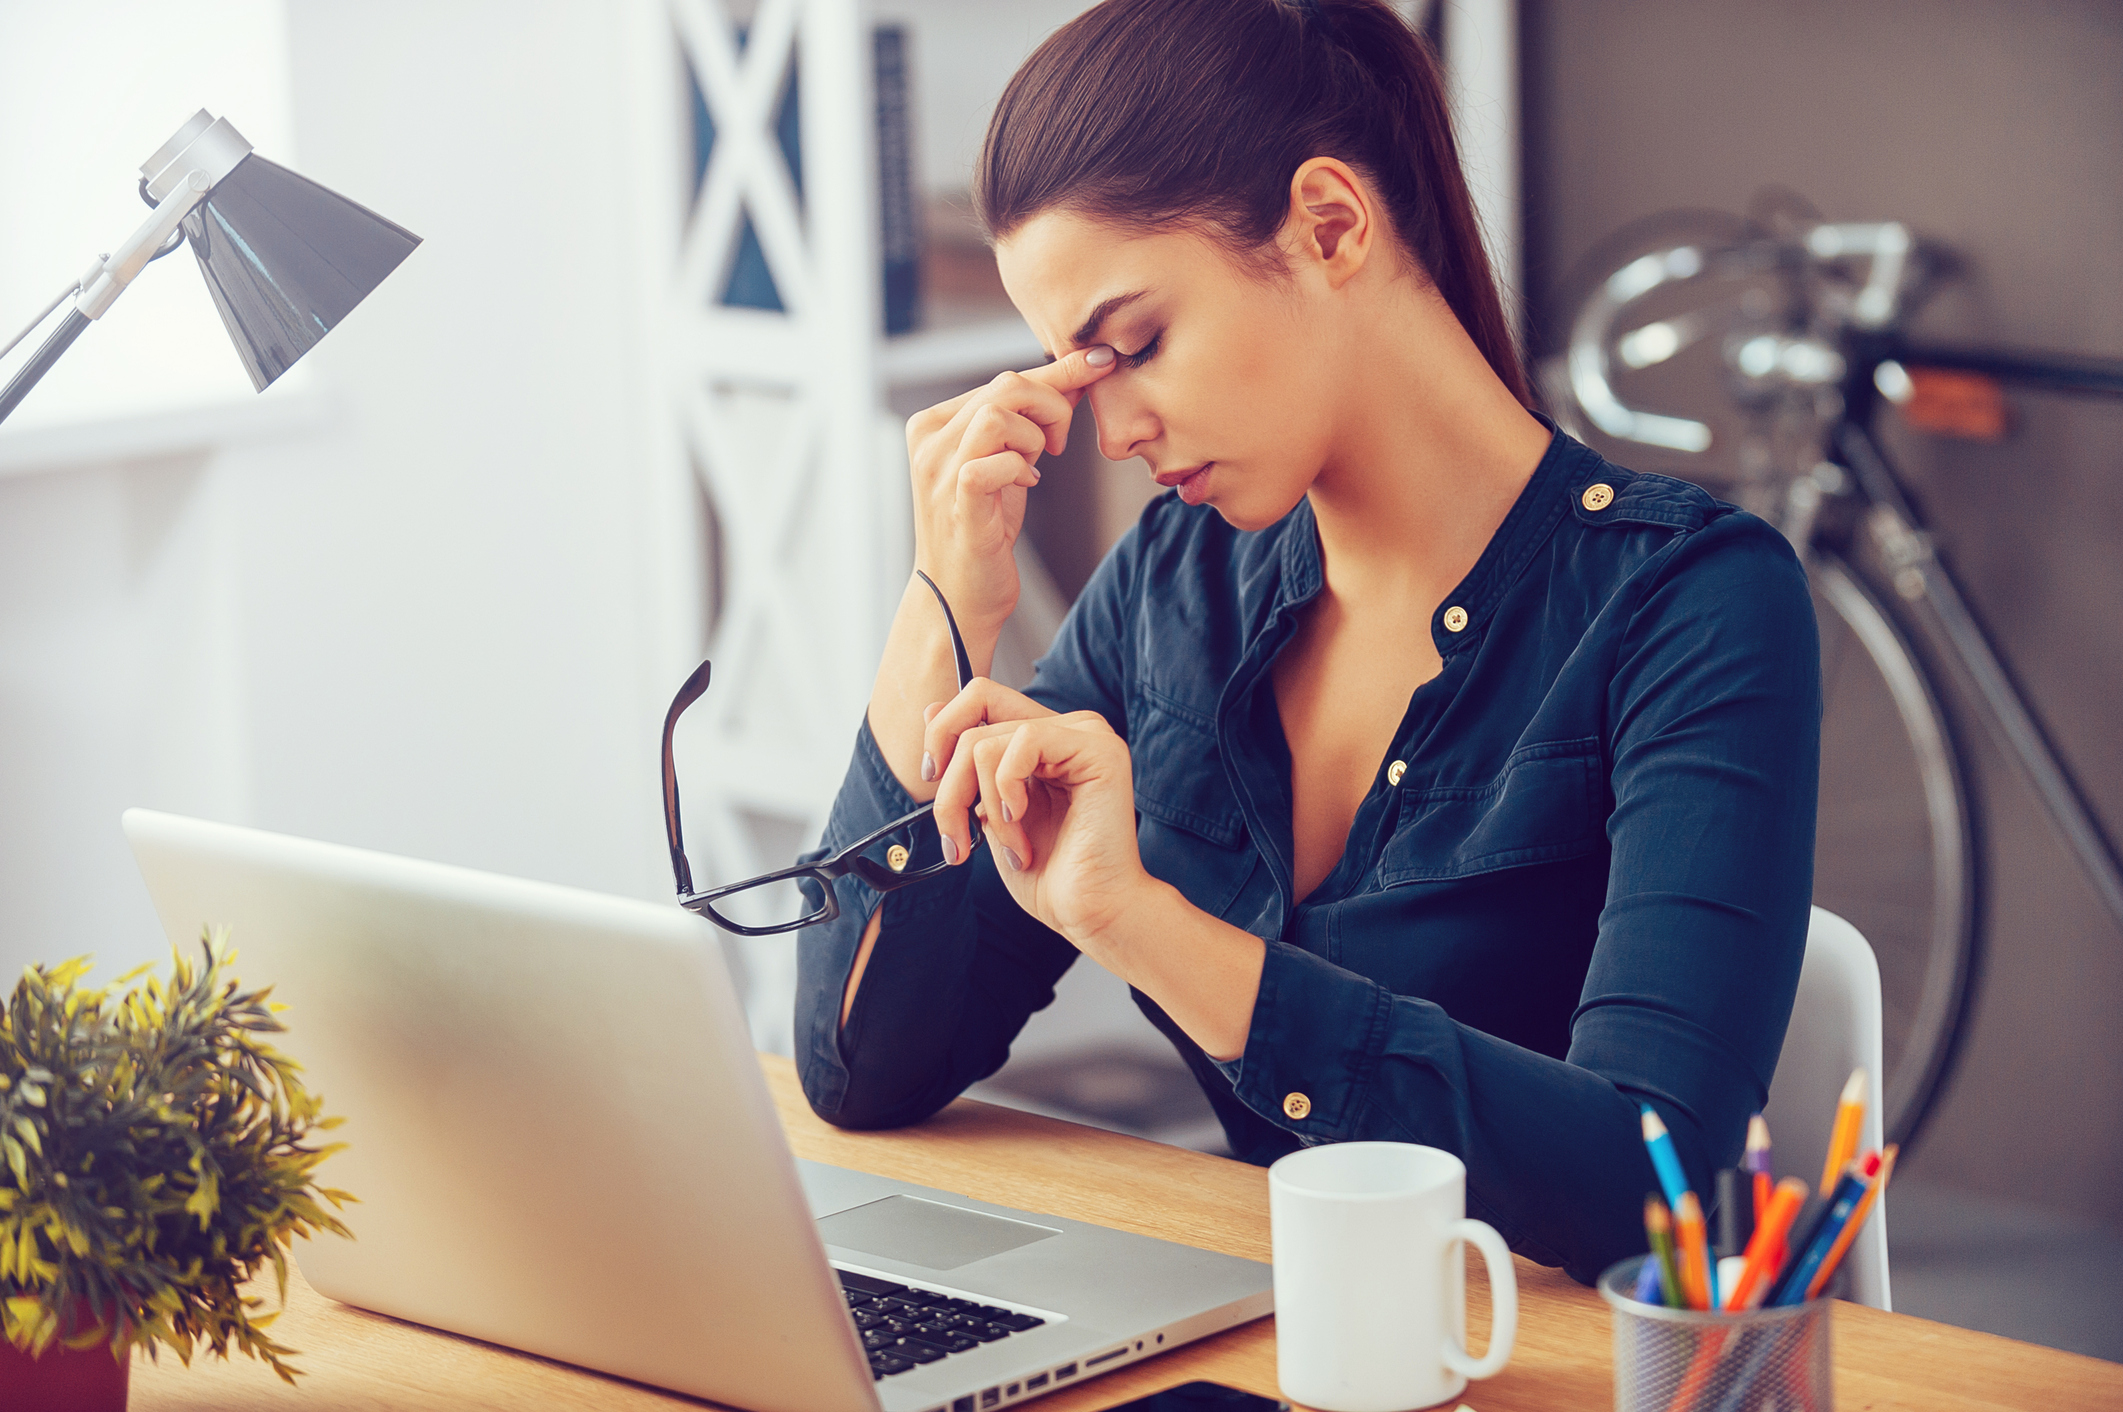 Generic photo of tired-looking woman sat at a desk rubbing her eyes (Thinkstock/PA)